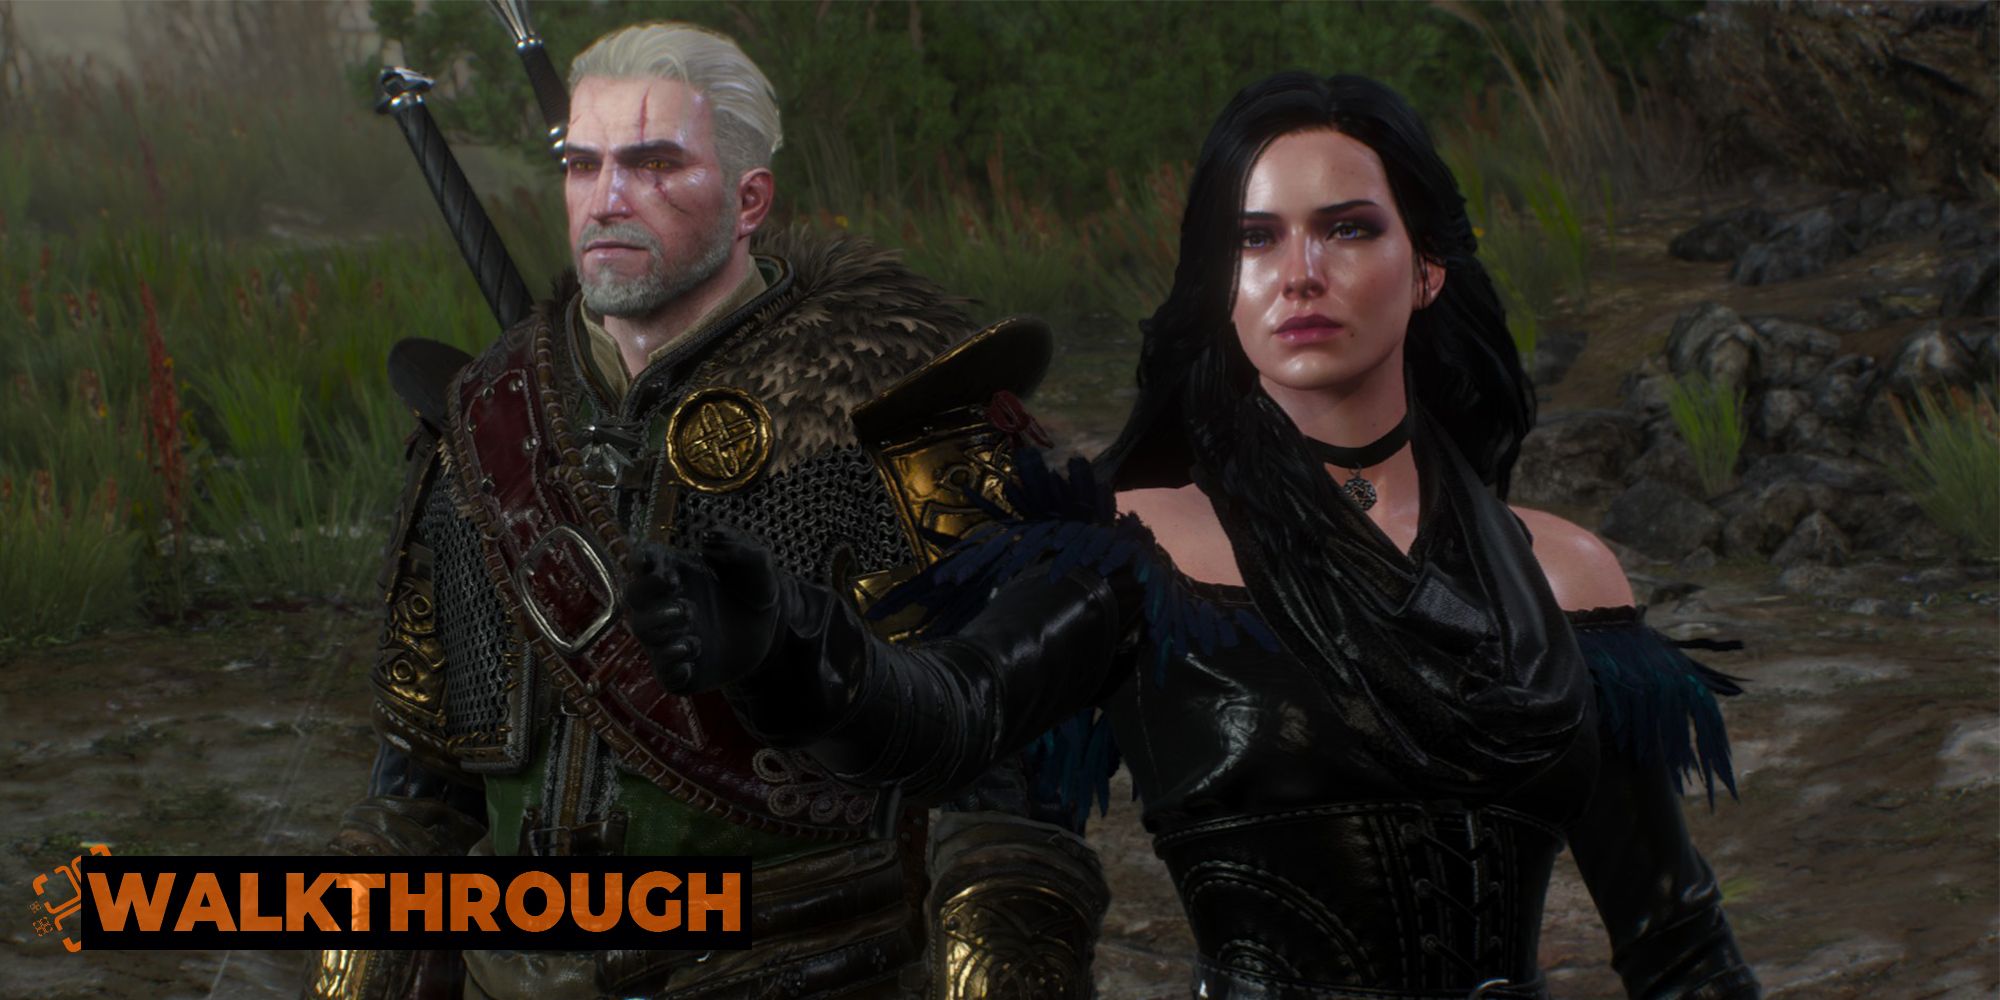 Geralt and Yennefer stand side by side, wet from a recent storm, as the sorceress outstretches her arm.